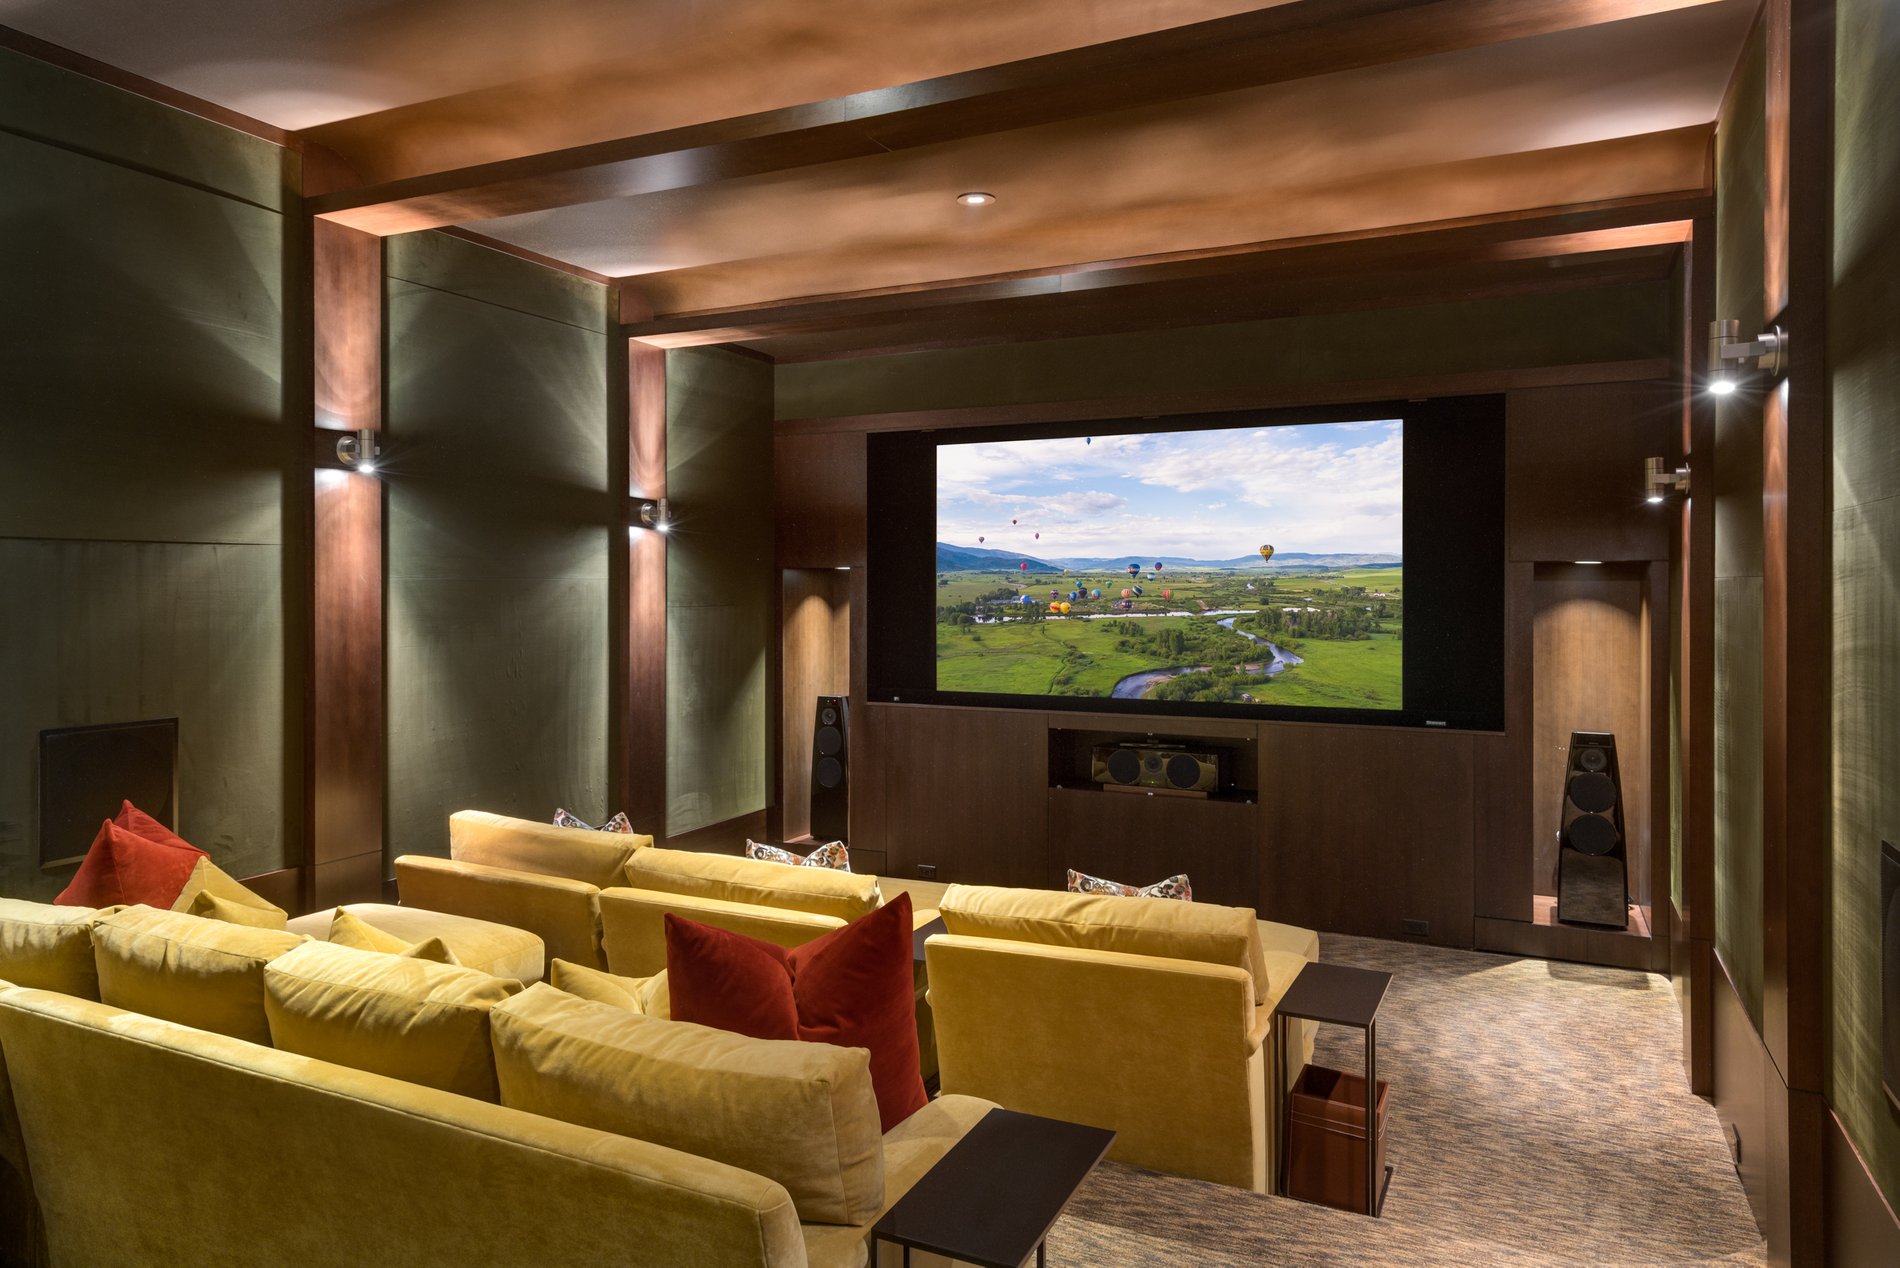 Movie room home theater finished to match the rest of the home. modern rustic home.